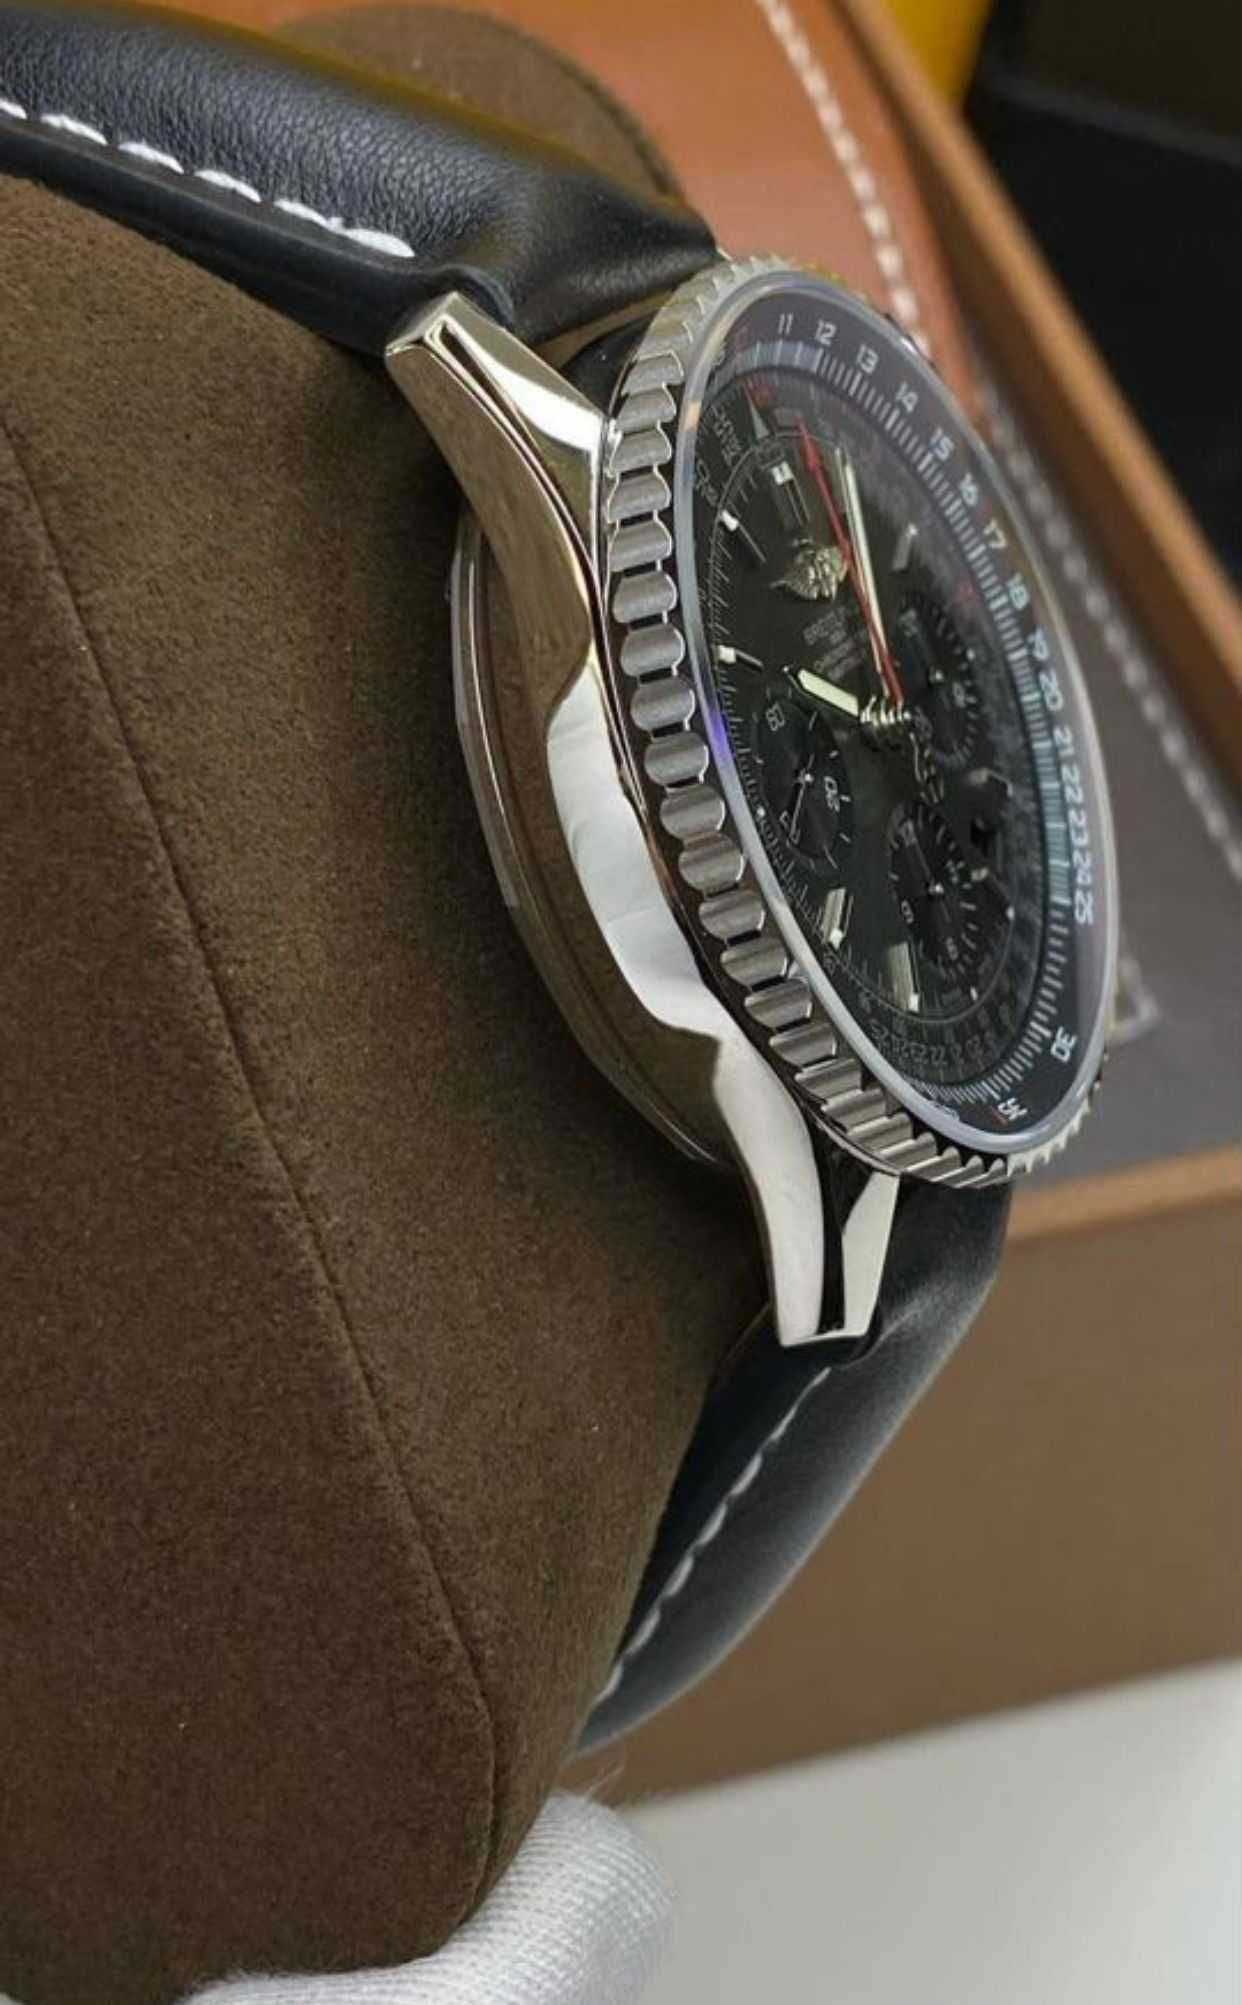 Breitling navitimer limited edition black and brown